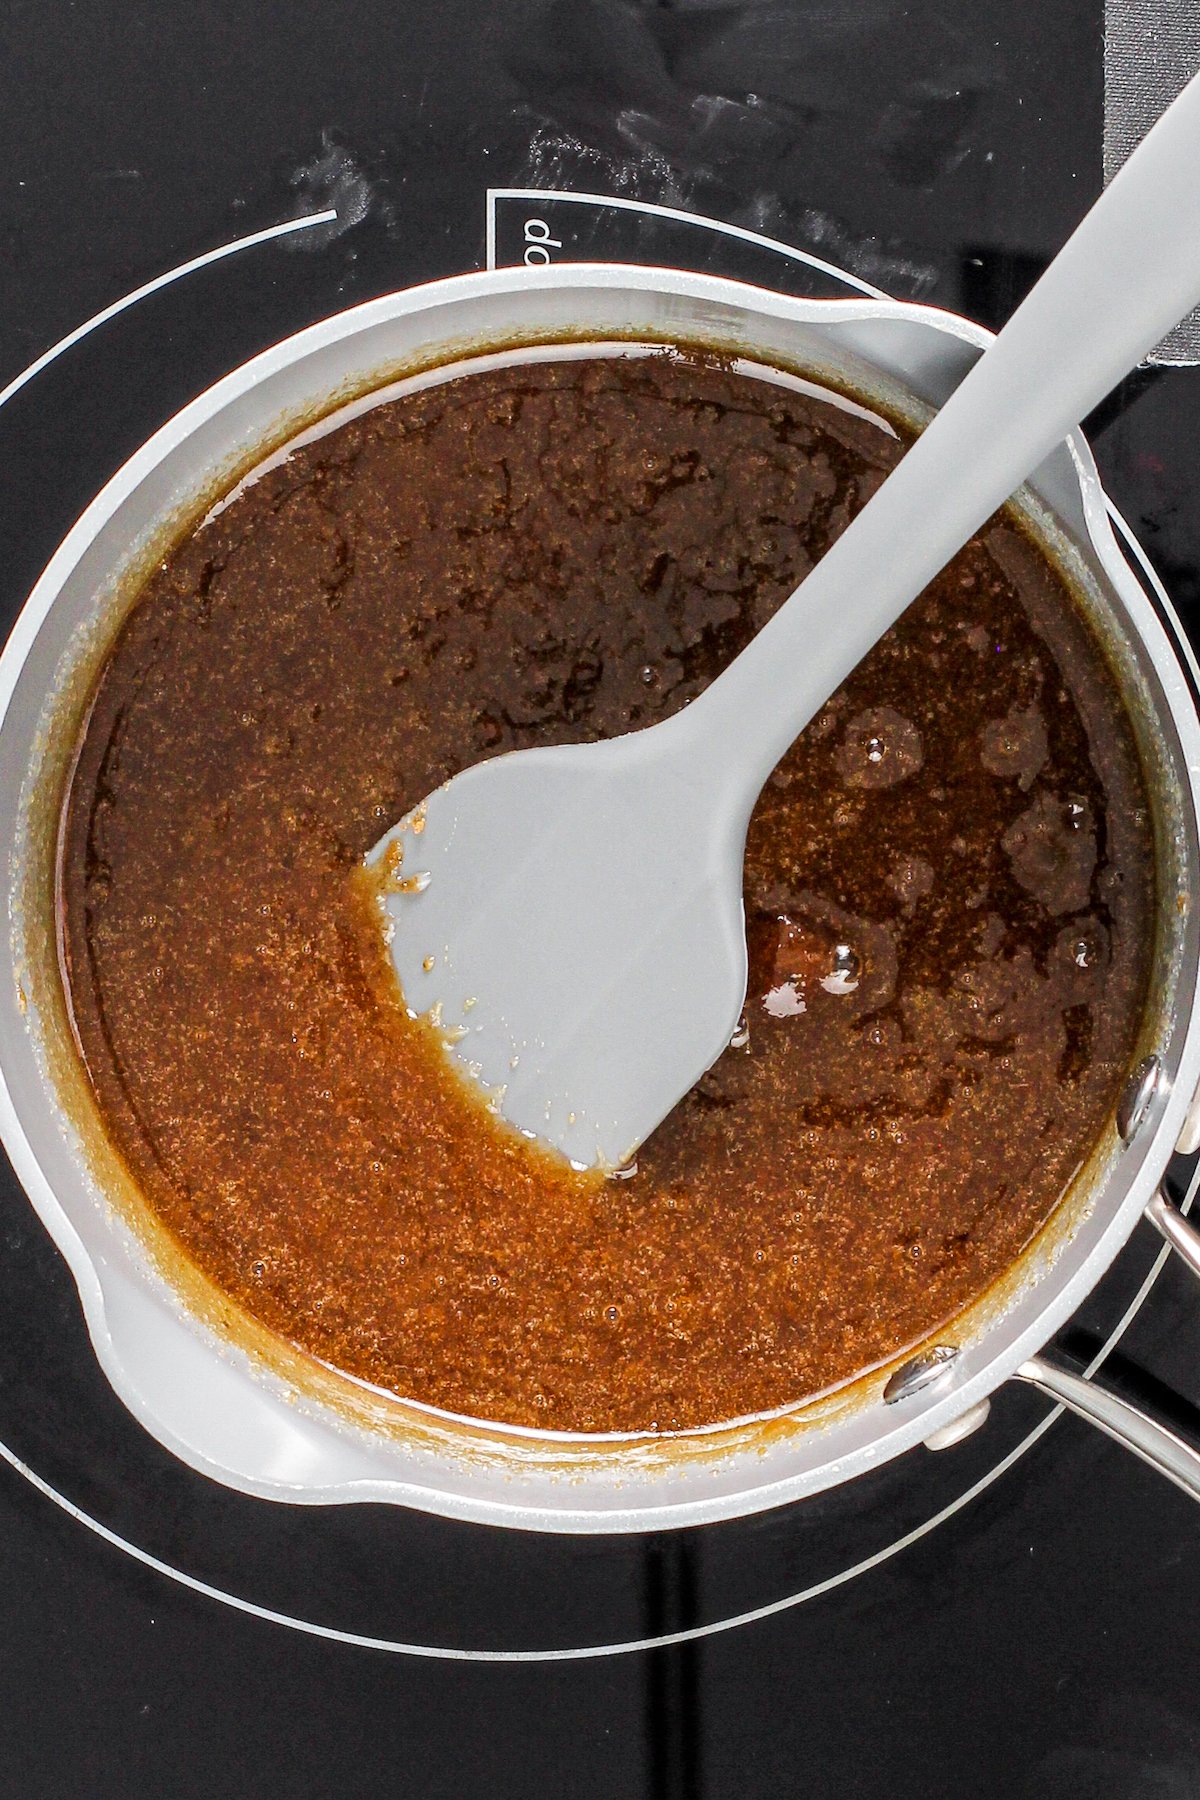 Butter, heavy cream, sugar and more boiling in a sauce pan with a spatula.